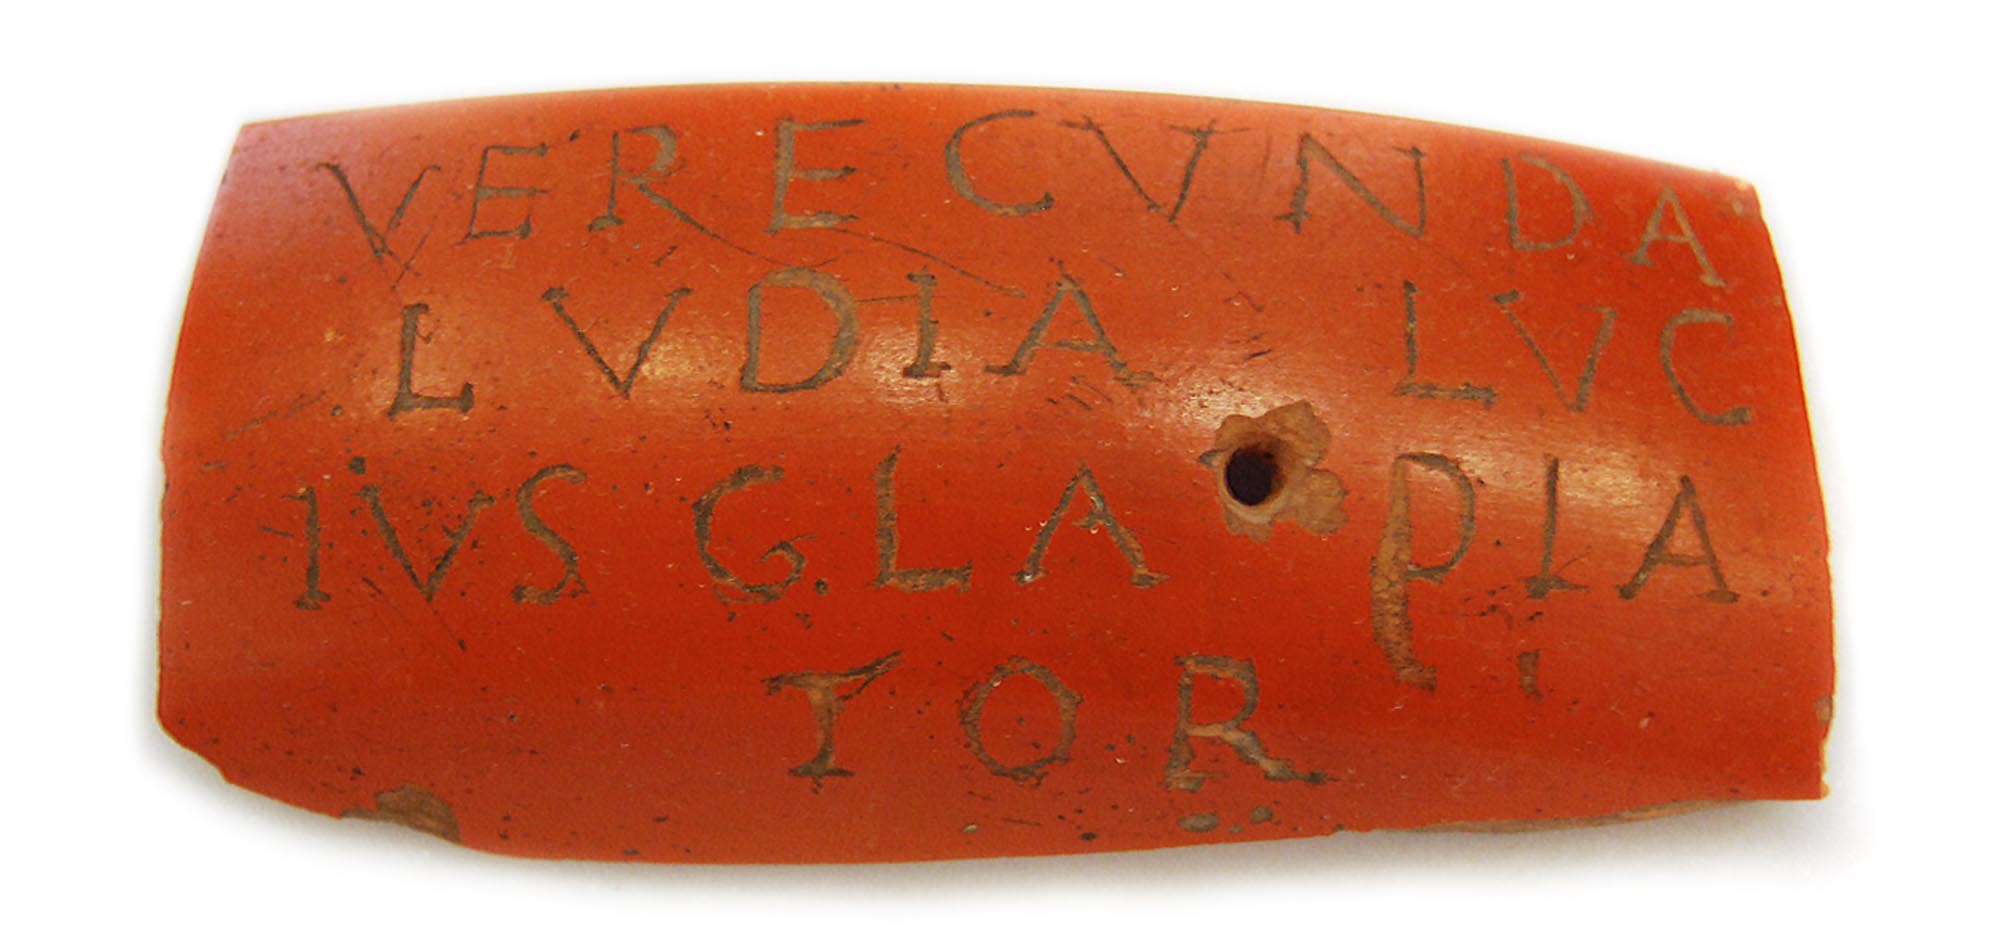 A sherd of red-slip Roman pottery with the inscription VERECVNDA LVDIA LVCIVS GLADIATOR meaning ‘Verecunda the actress (or female gladiator) and Lucius the Gladiator’. Possibly a love token meant to be worn -